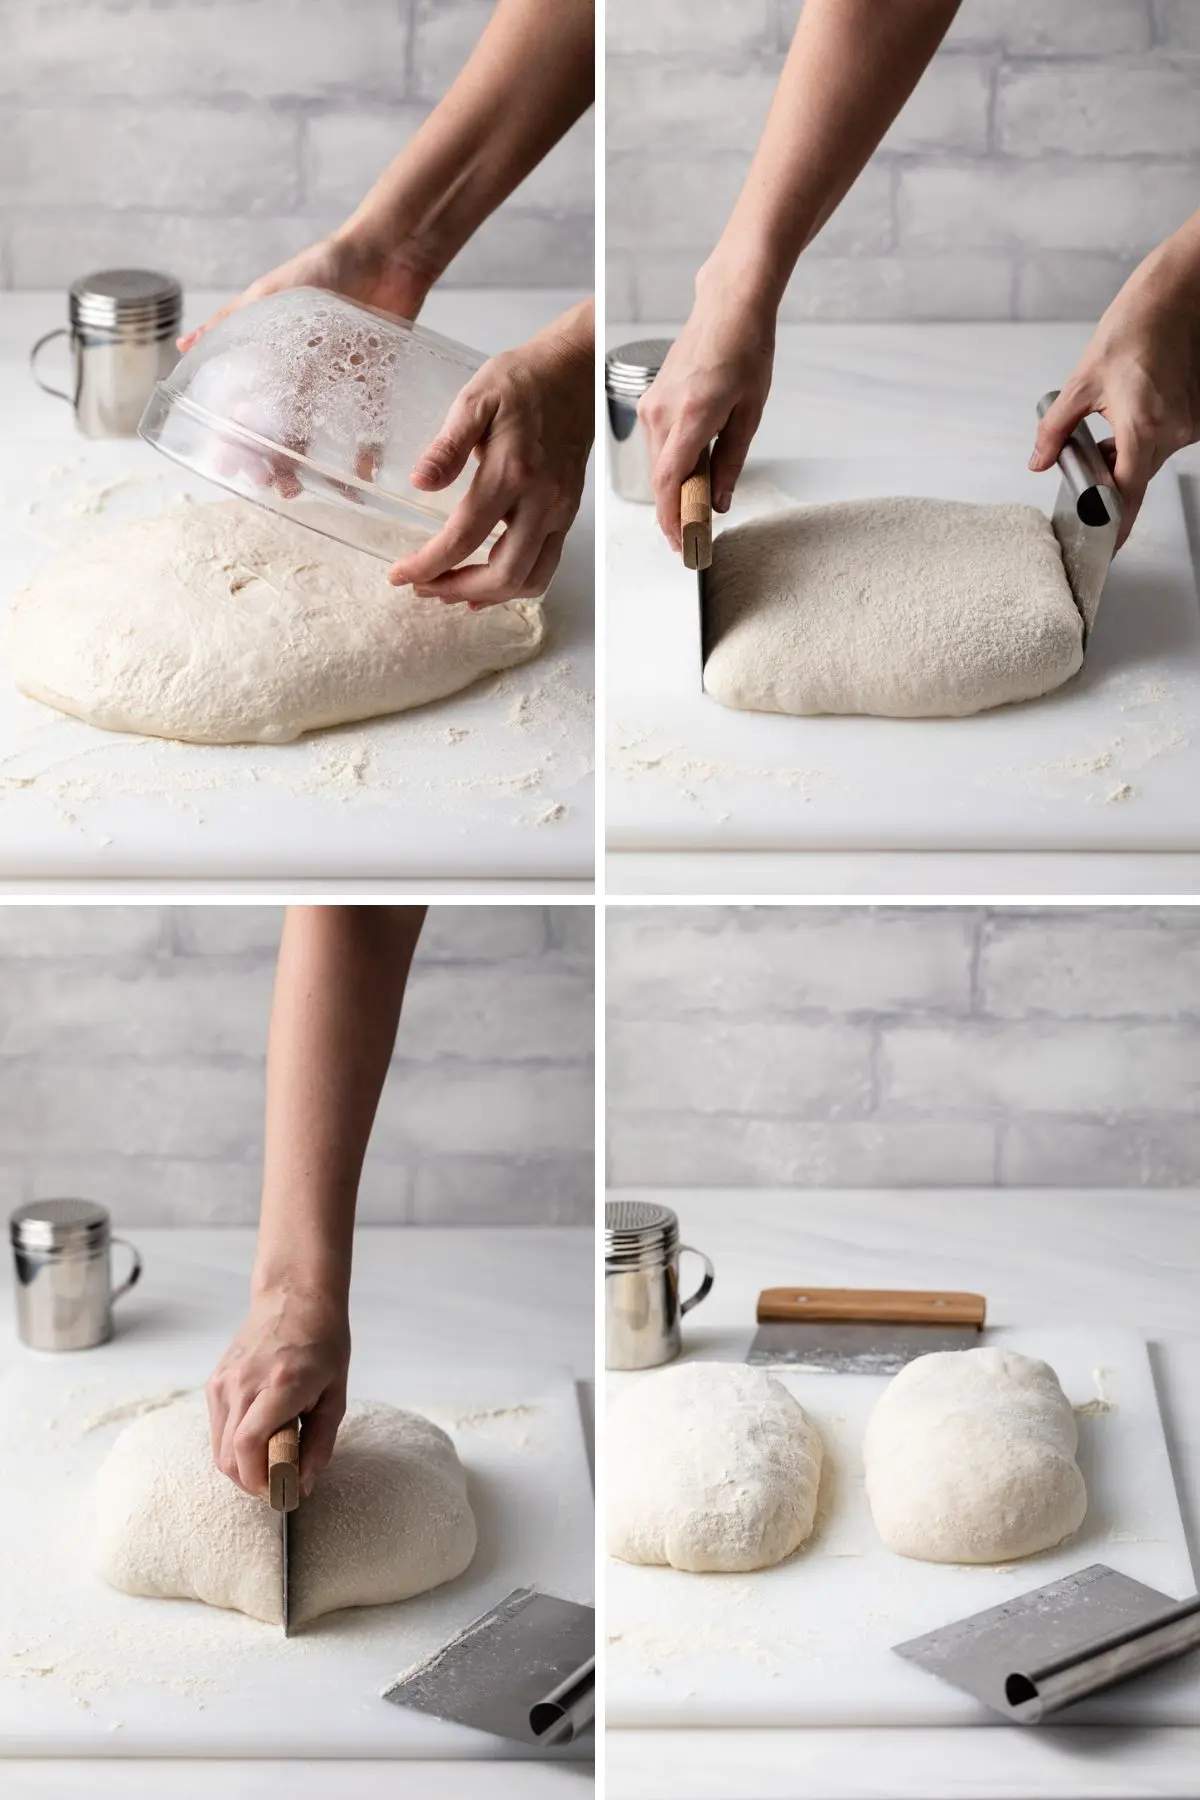 dumping dough out of bowl onto worksurface, shaping dough into a square using bench scrapers, cutting square dough in half, and two loaves of unbaked ciabatta 